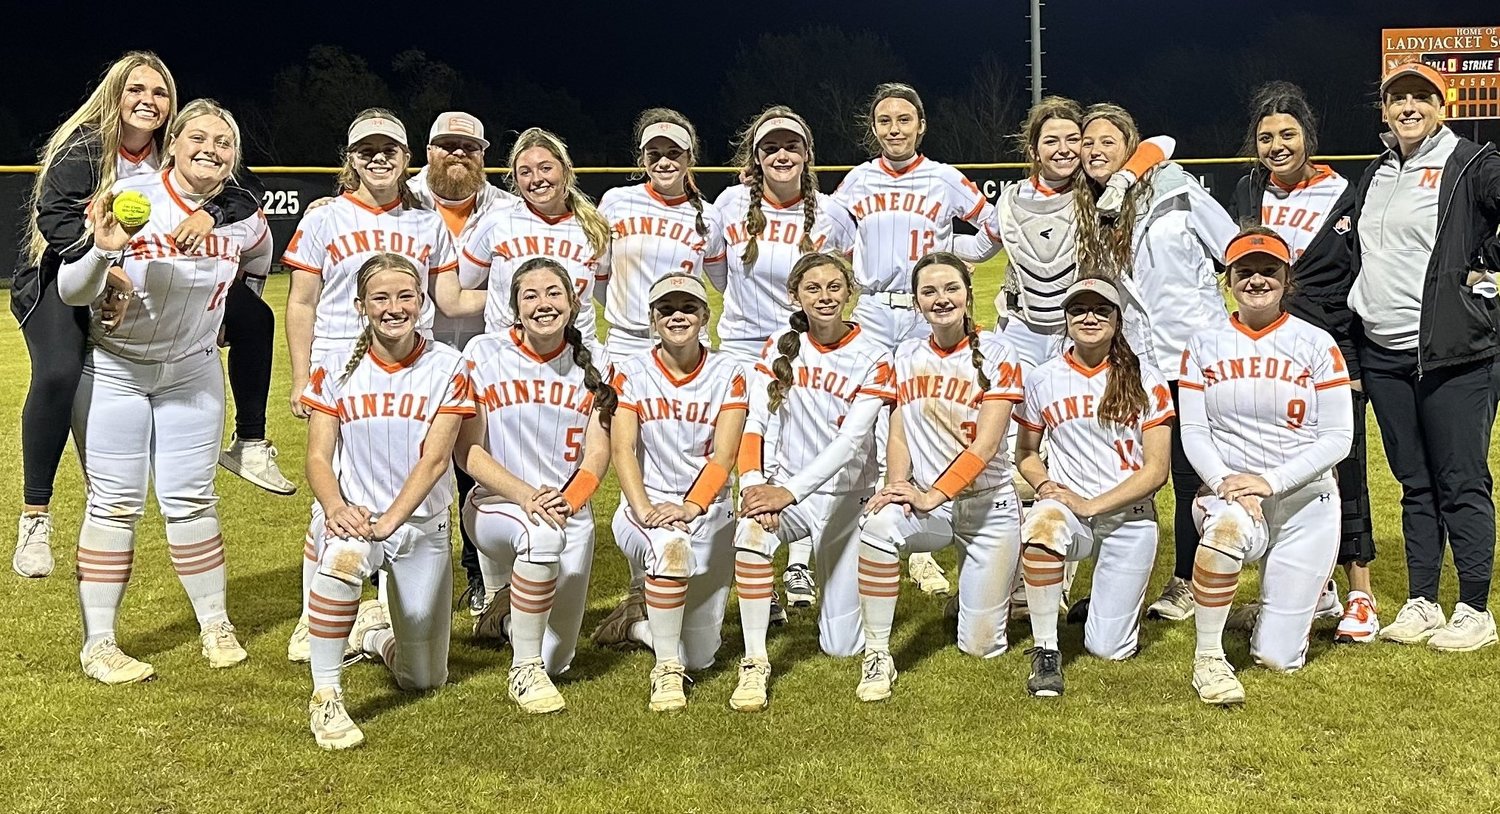 The Mineola softball team came together last Tuesday to record a 6-3 win over the visiting Harmony Lady Eagles. Jadelyn Marshall scattered five hits while striking out nine and issuing only one free pass. Caroline Castleberry, Gracie Finley and Gracie Lindley led the Lady Jackets at the plate by recording multiple base hits. Lady Jacket head coach Taelor Cheshier commented, “Our win against Harmony was a total team win, where every player pitched in to help the team in a selfless manner. As a coach it was one of our proudest moments to know our team came together to beat a good Harmony team for the win.” The Lady Jackets were all smiles in the team photo after the win. They are, back from left, Jocelyn Whitehead, Brooke Louderman (on Jocelyn’s back), Lucy Goodson, Coach Jason Goodson, Lexie Miller, Allie Hooton, Krissie Barker, Mycah Morman, Jaycee Smith, Carmyn Heim, Maddie Short, Coach Taelor Cheshier; front, Clara Marlow, Jadelyn Marshall, Jorja Young, Caroline Castleberry, Gracie Lindley, Destinee Gandy and Gracie Finley. (